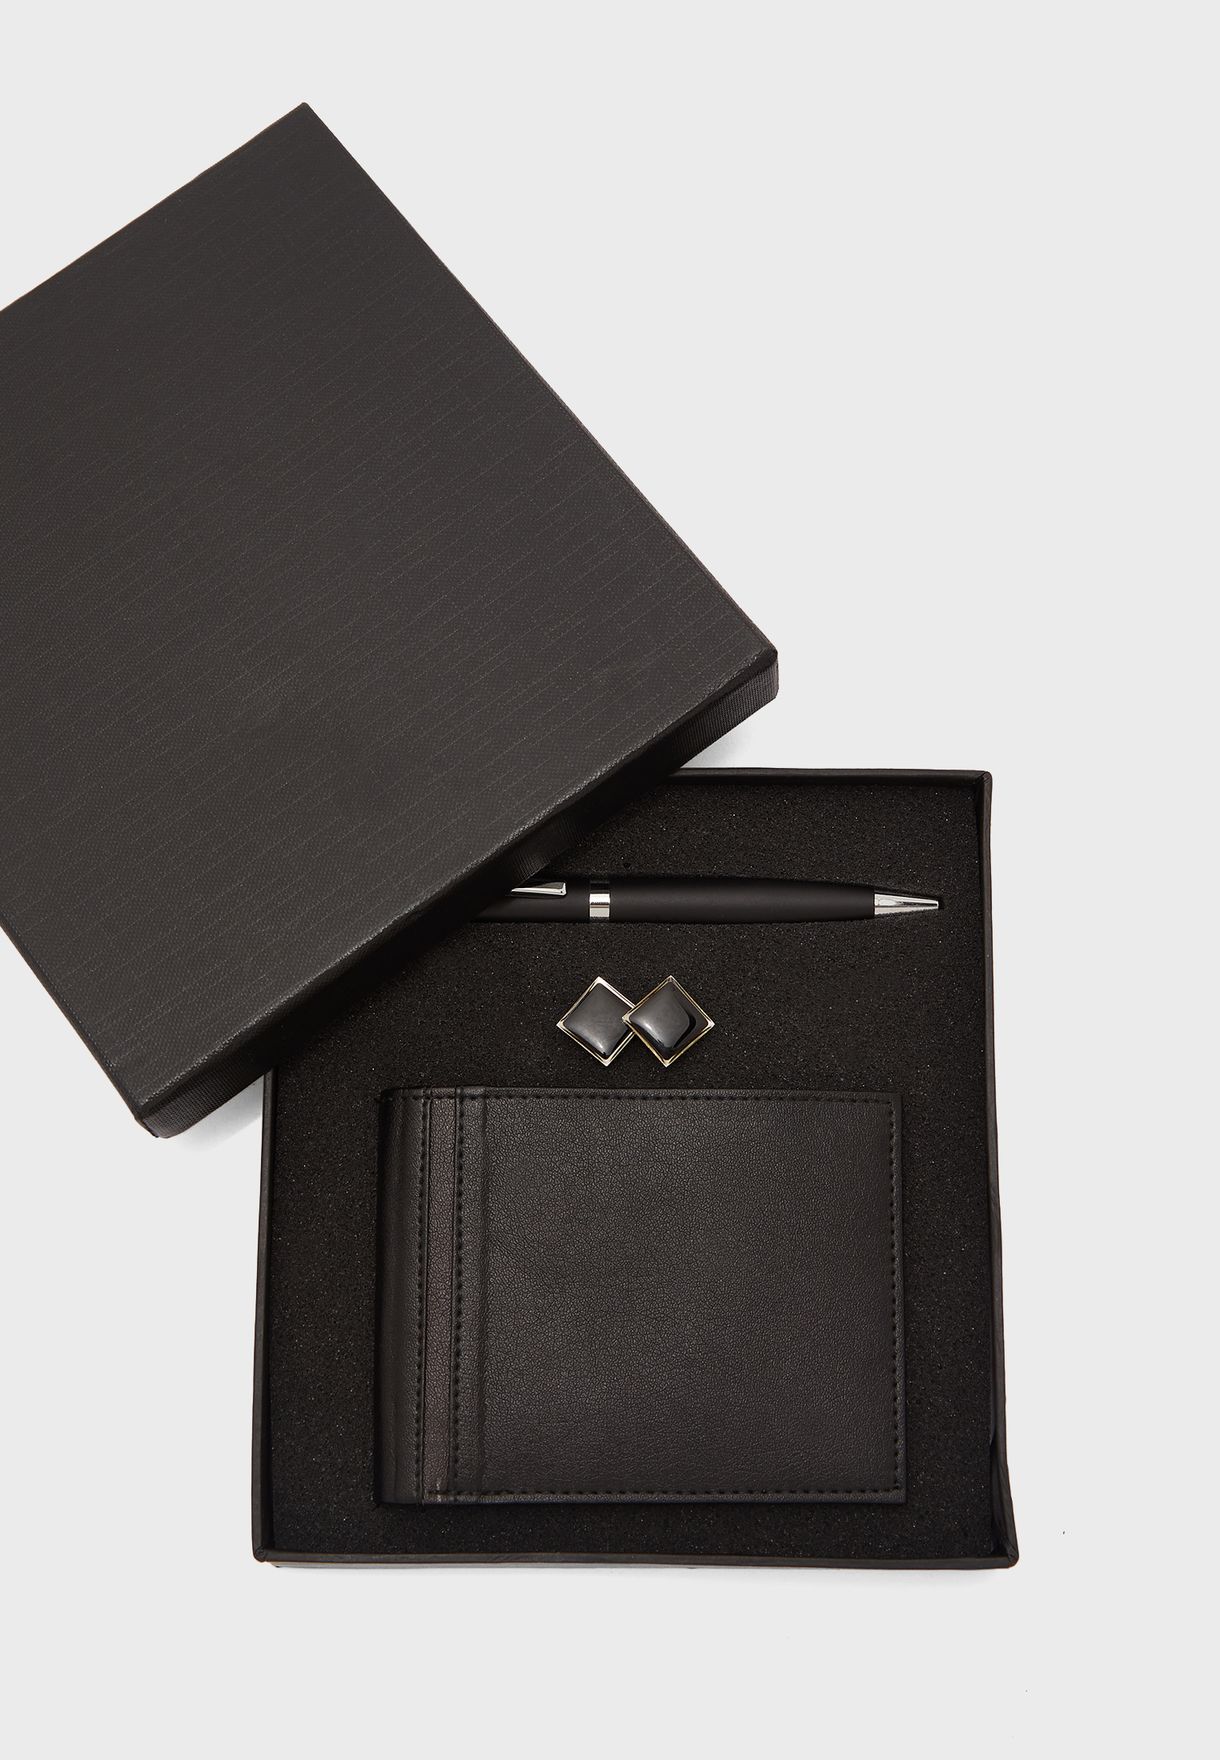 Wallet, Pen And Cuff Link Gifting Set